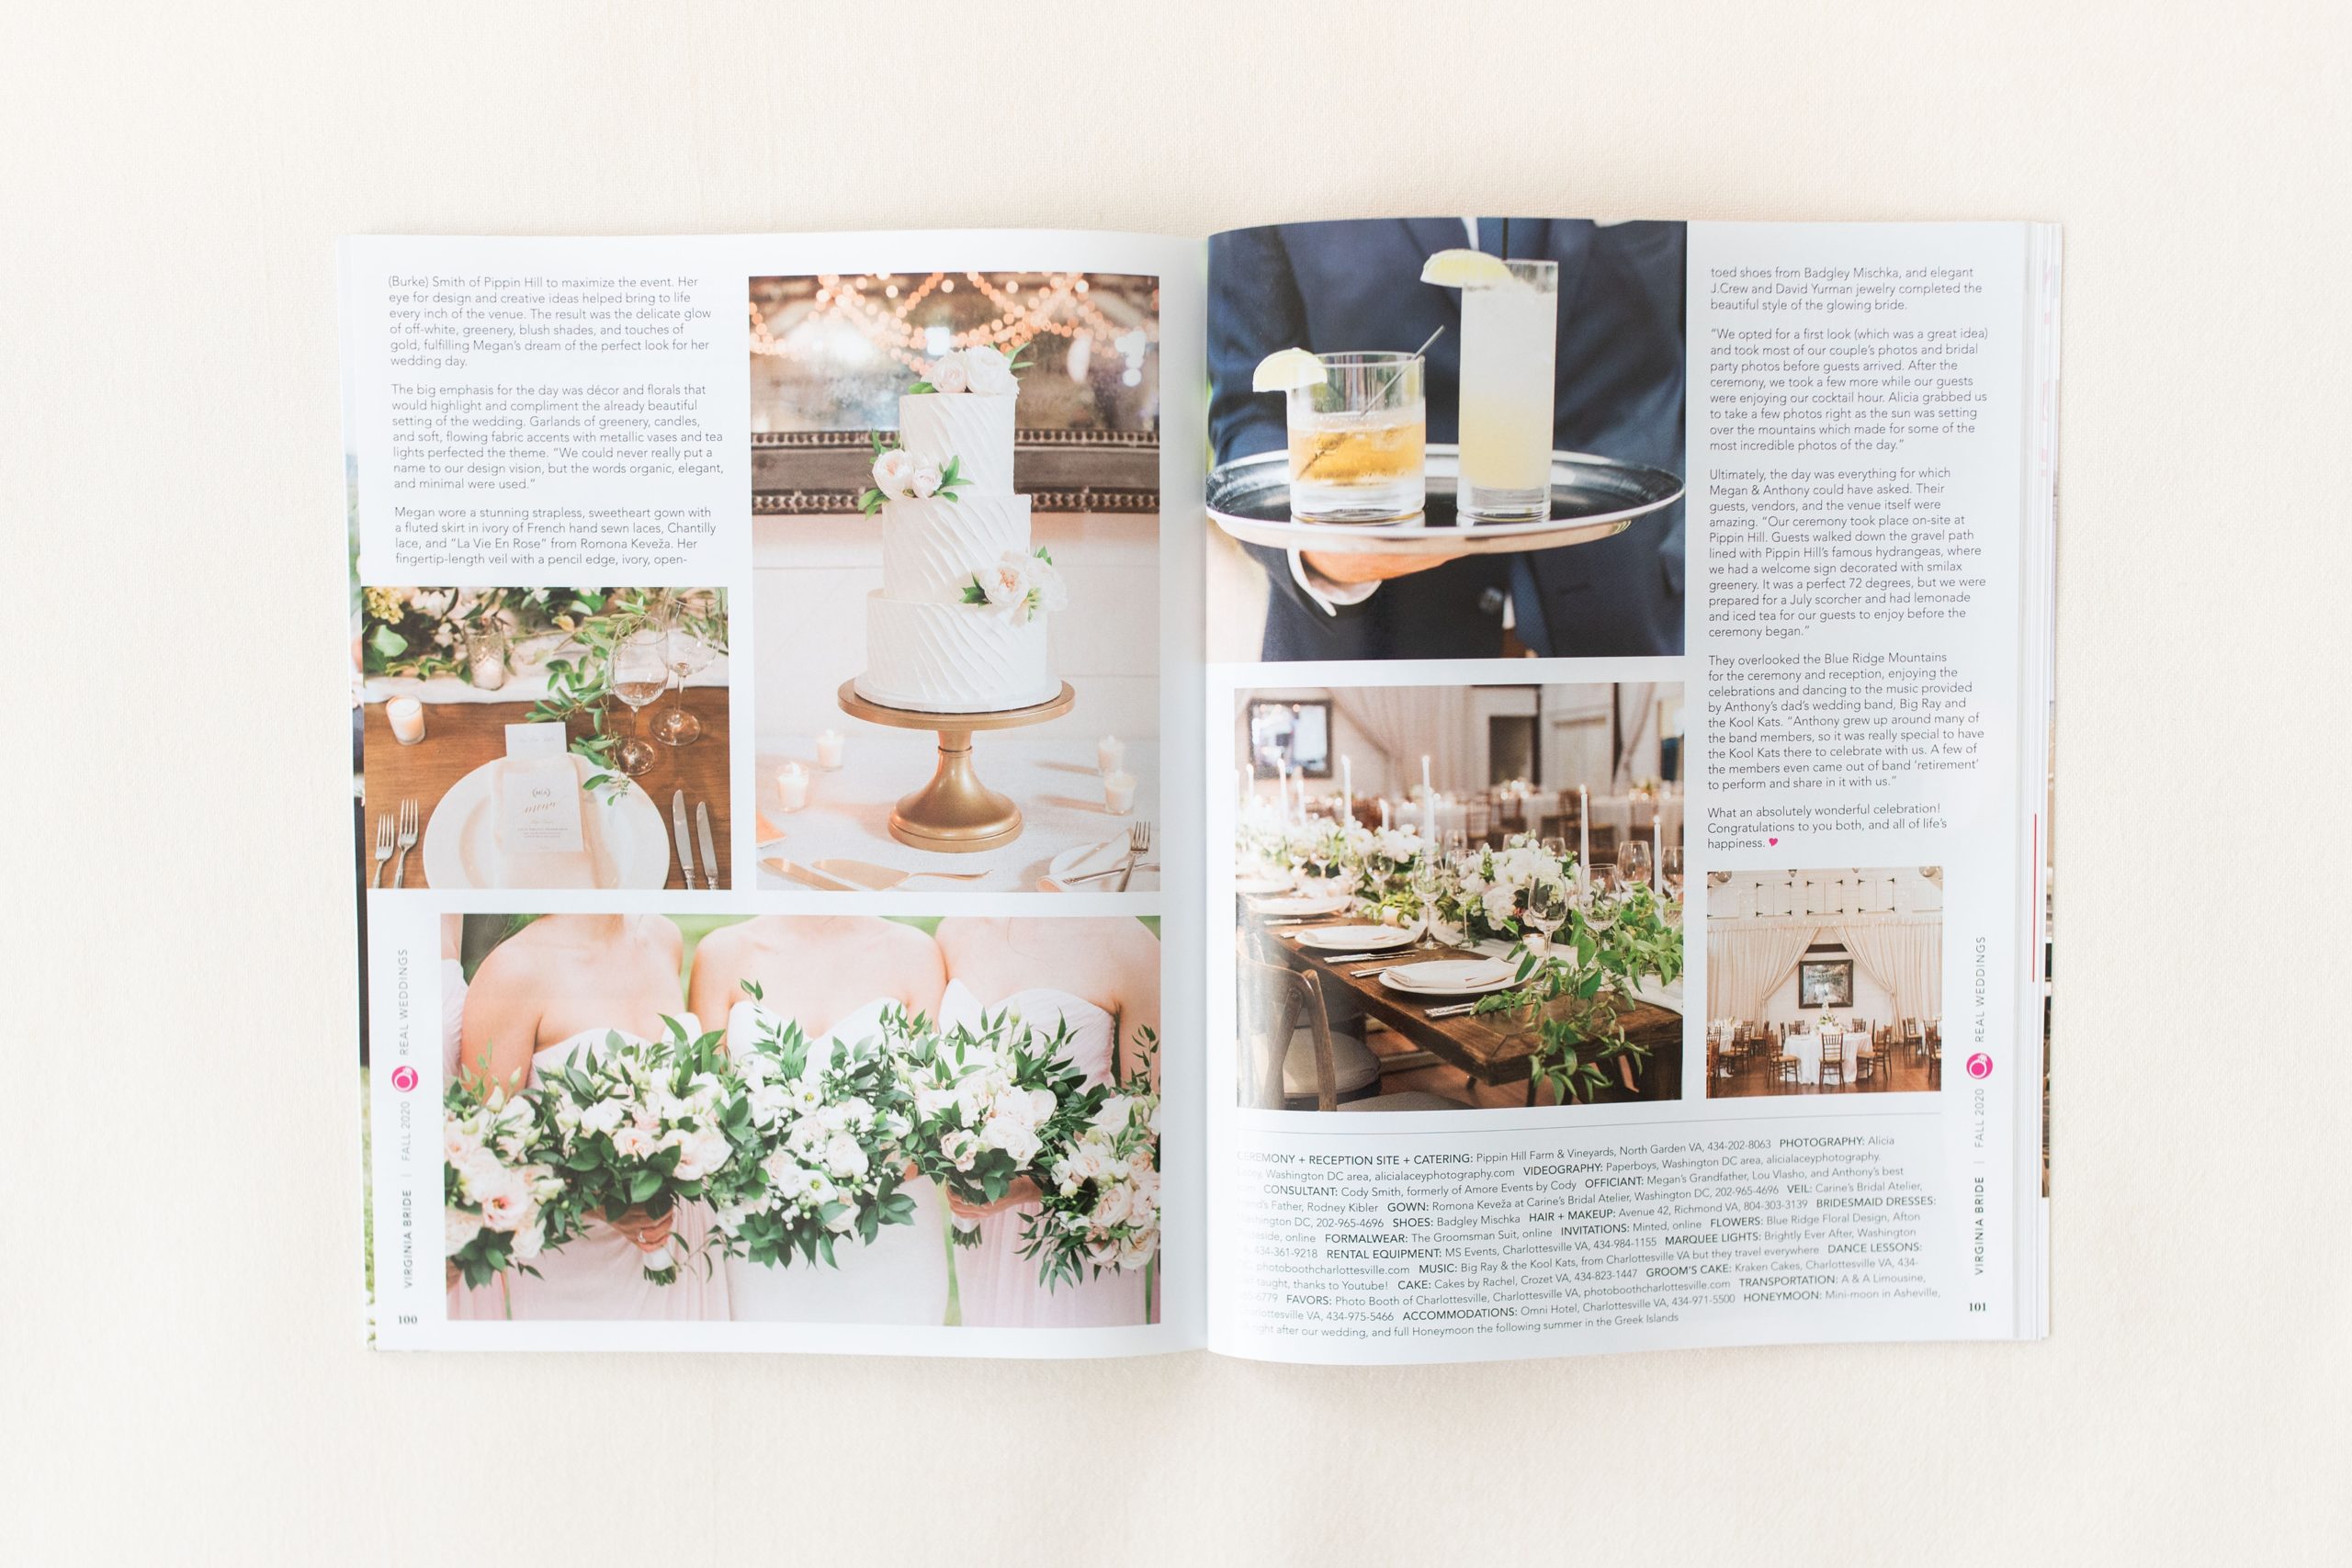 This elegant wedding at Pippin Hill in Charlottesville, Virginia is featured in the fall issue of VA Bride Magazine.